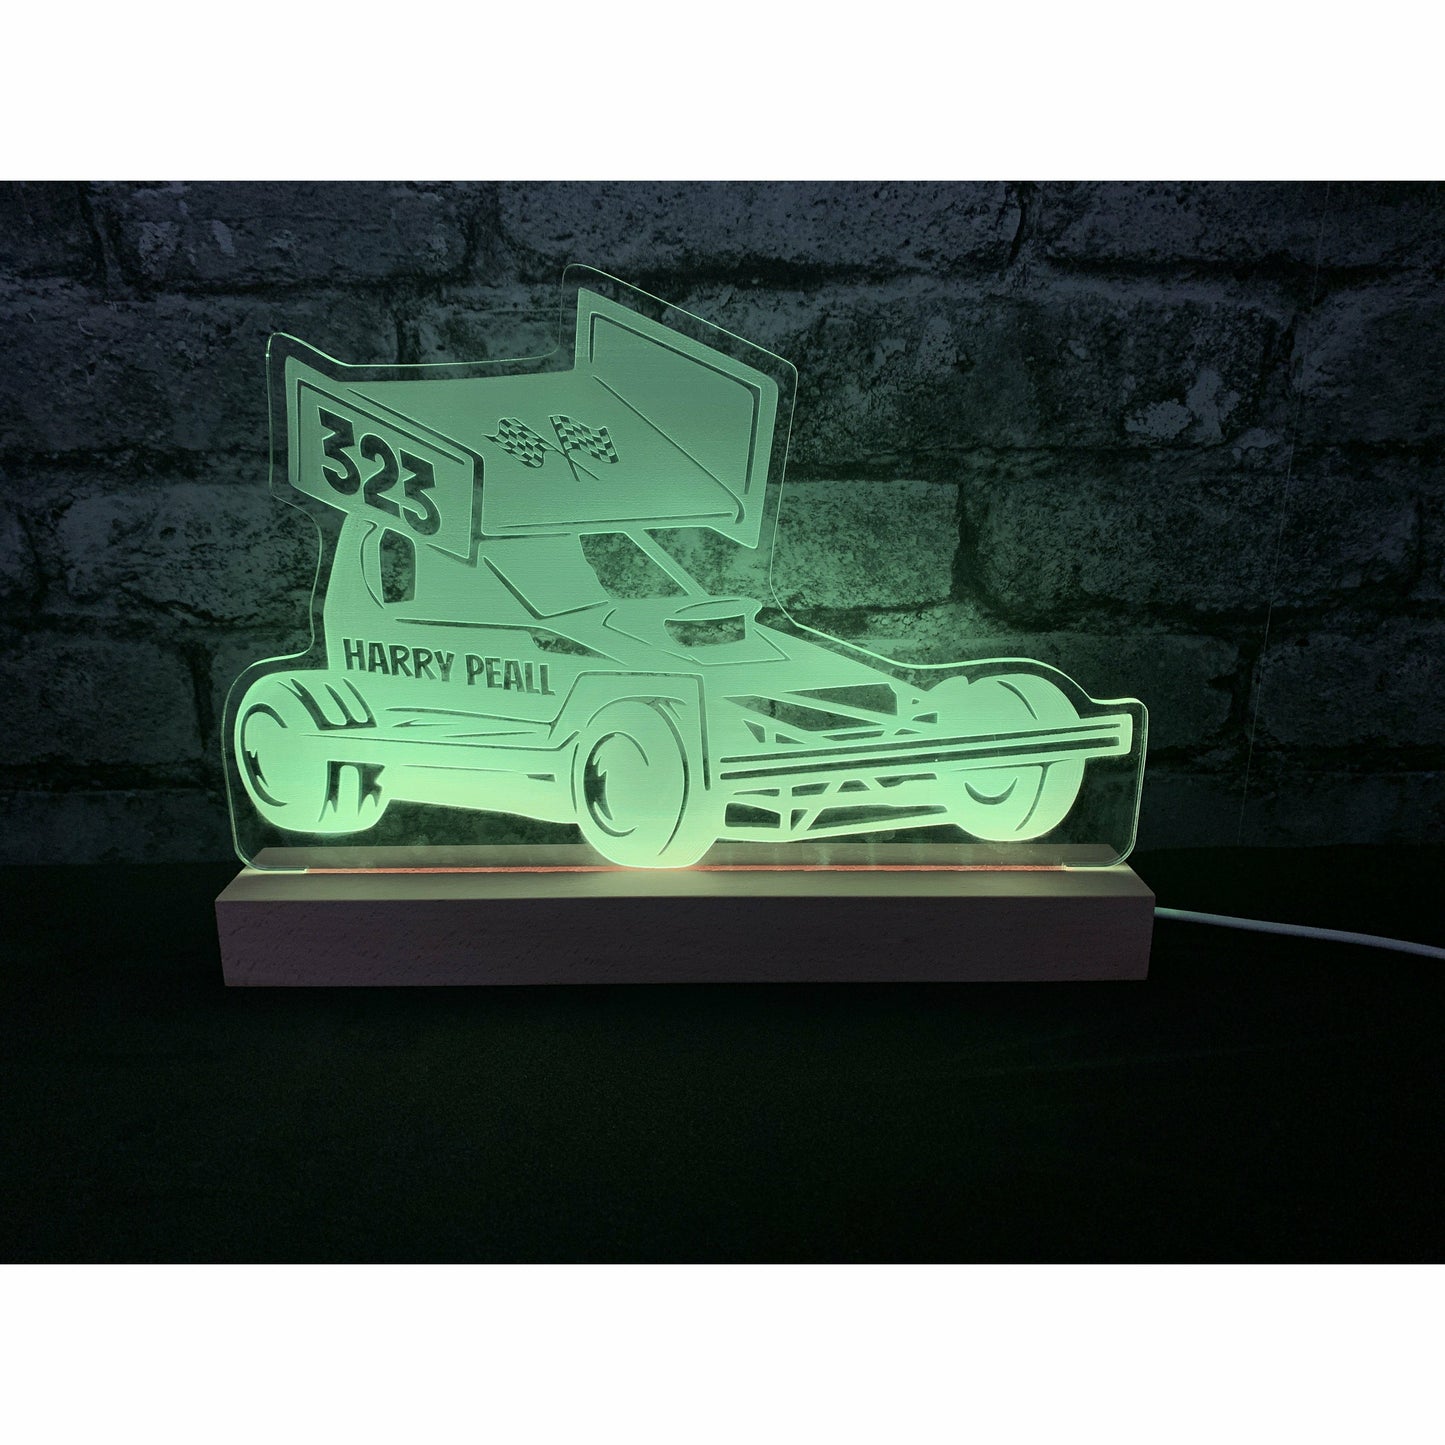 FROSTED Brisca F1 Night Light - Large Wooden Base - Night Light - Stock Car & Banger Toy Tracks